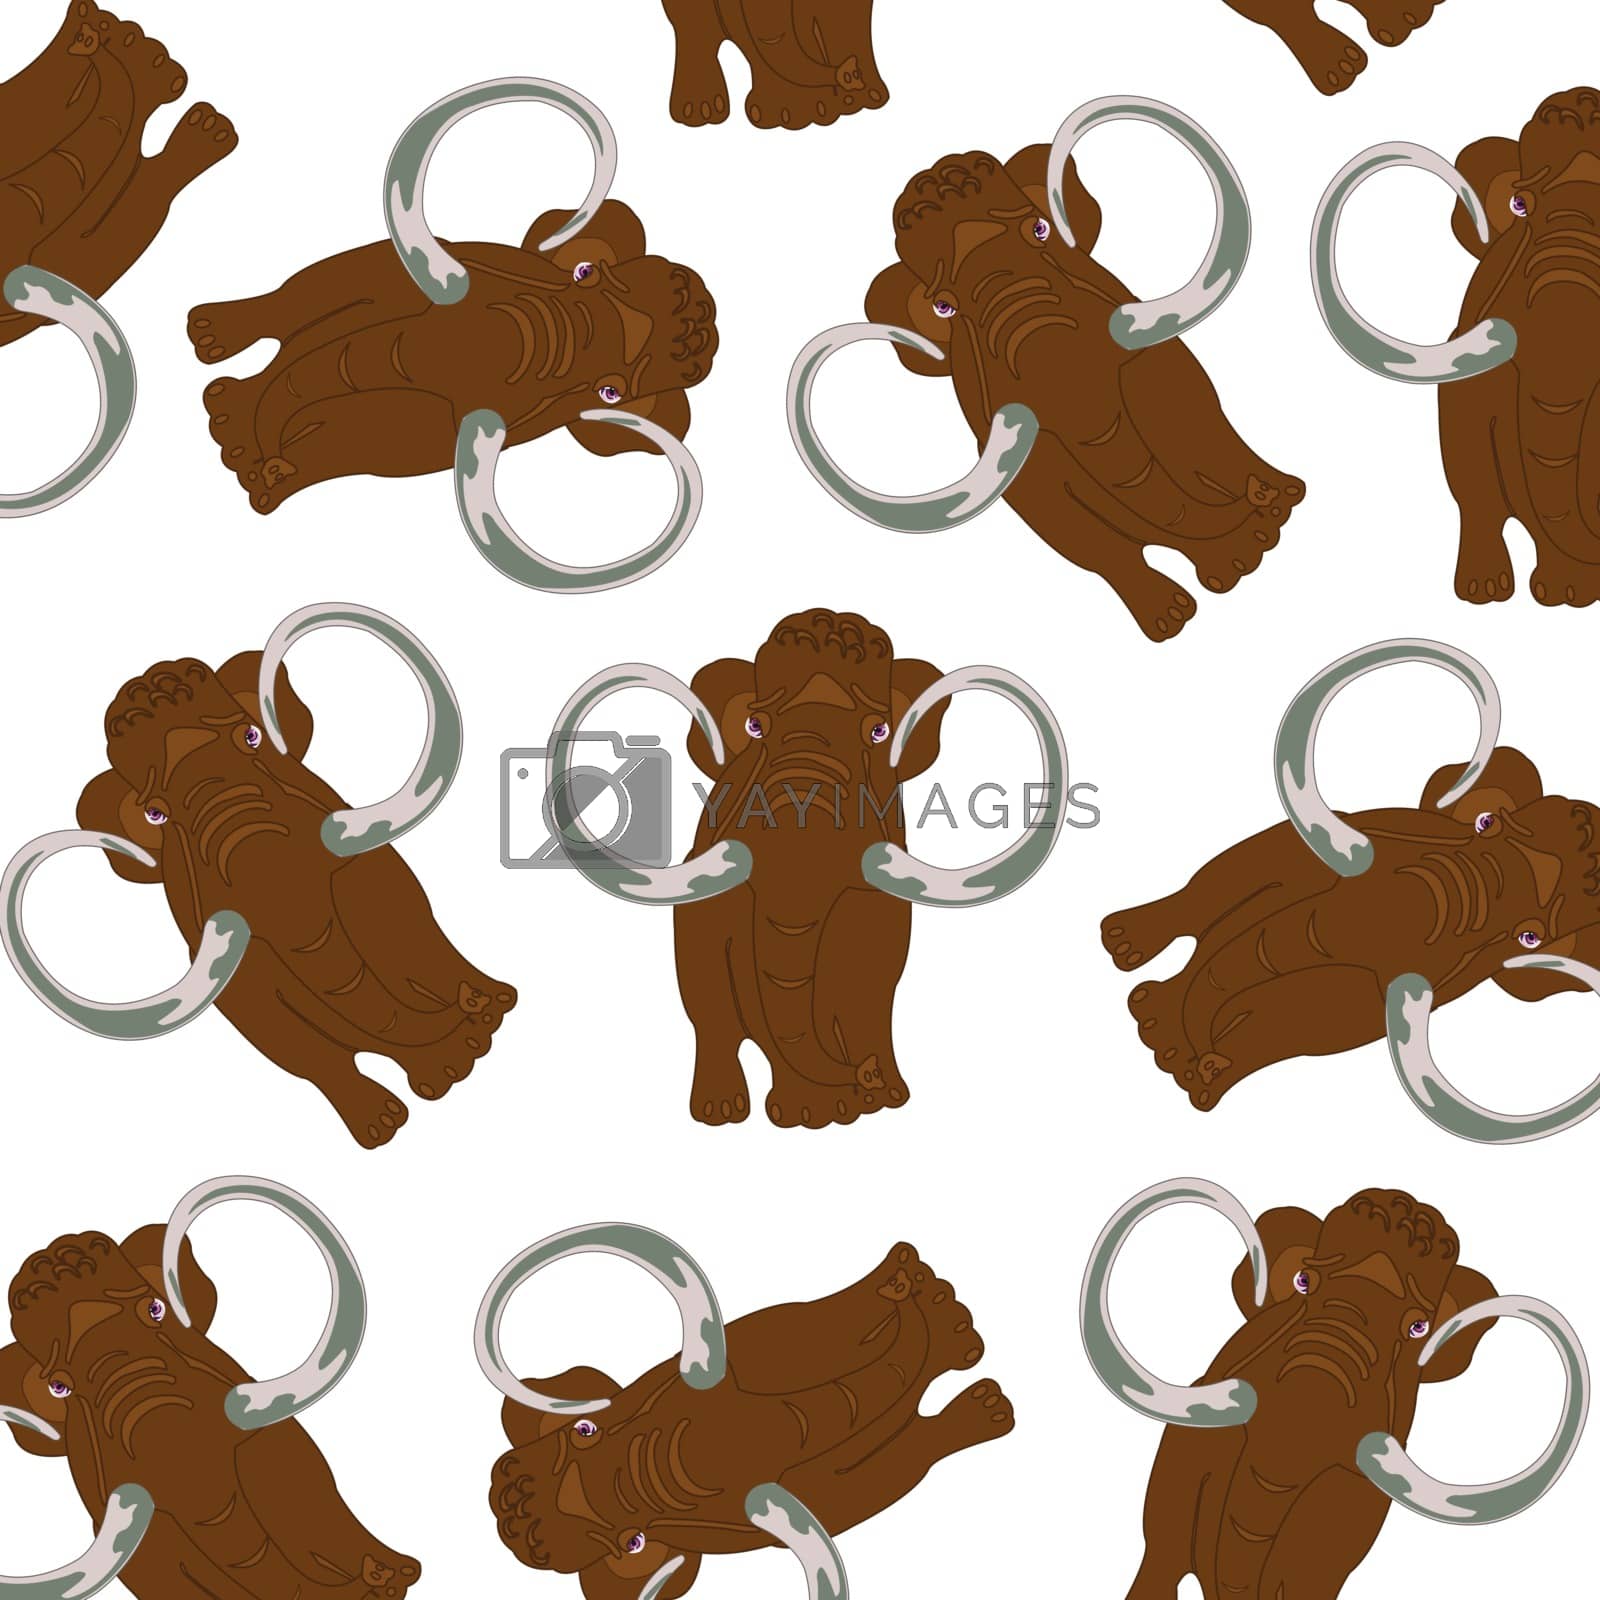 Royalty free image of Prehistorical animal mammoth pattern on white background by cobol1964